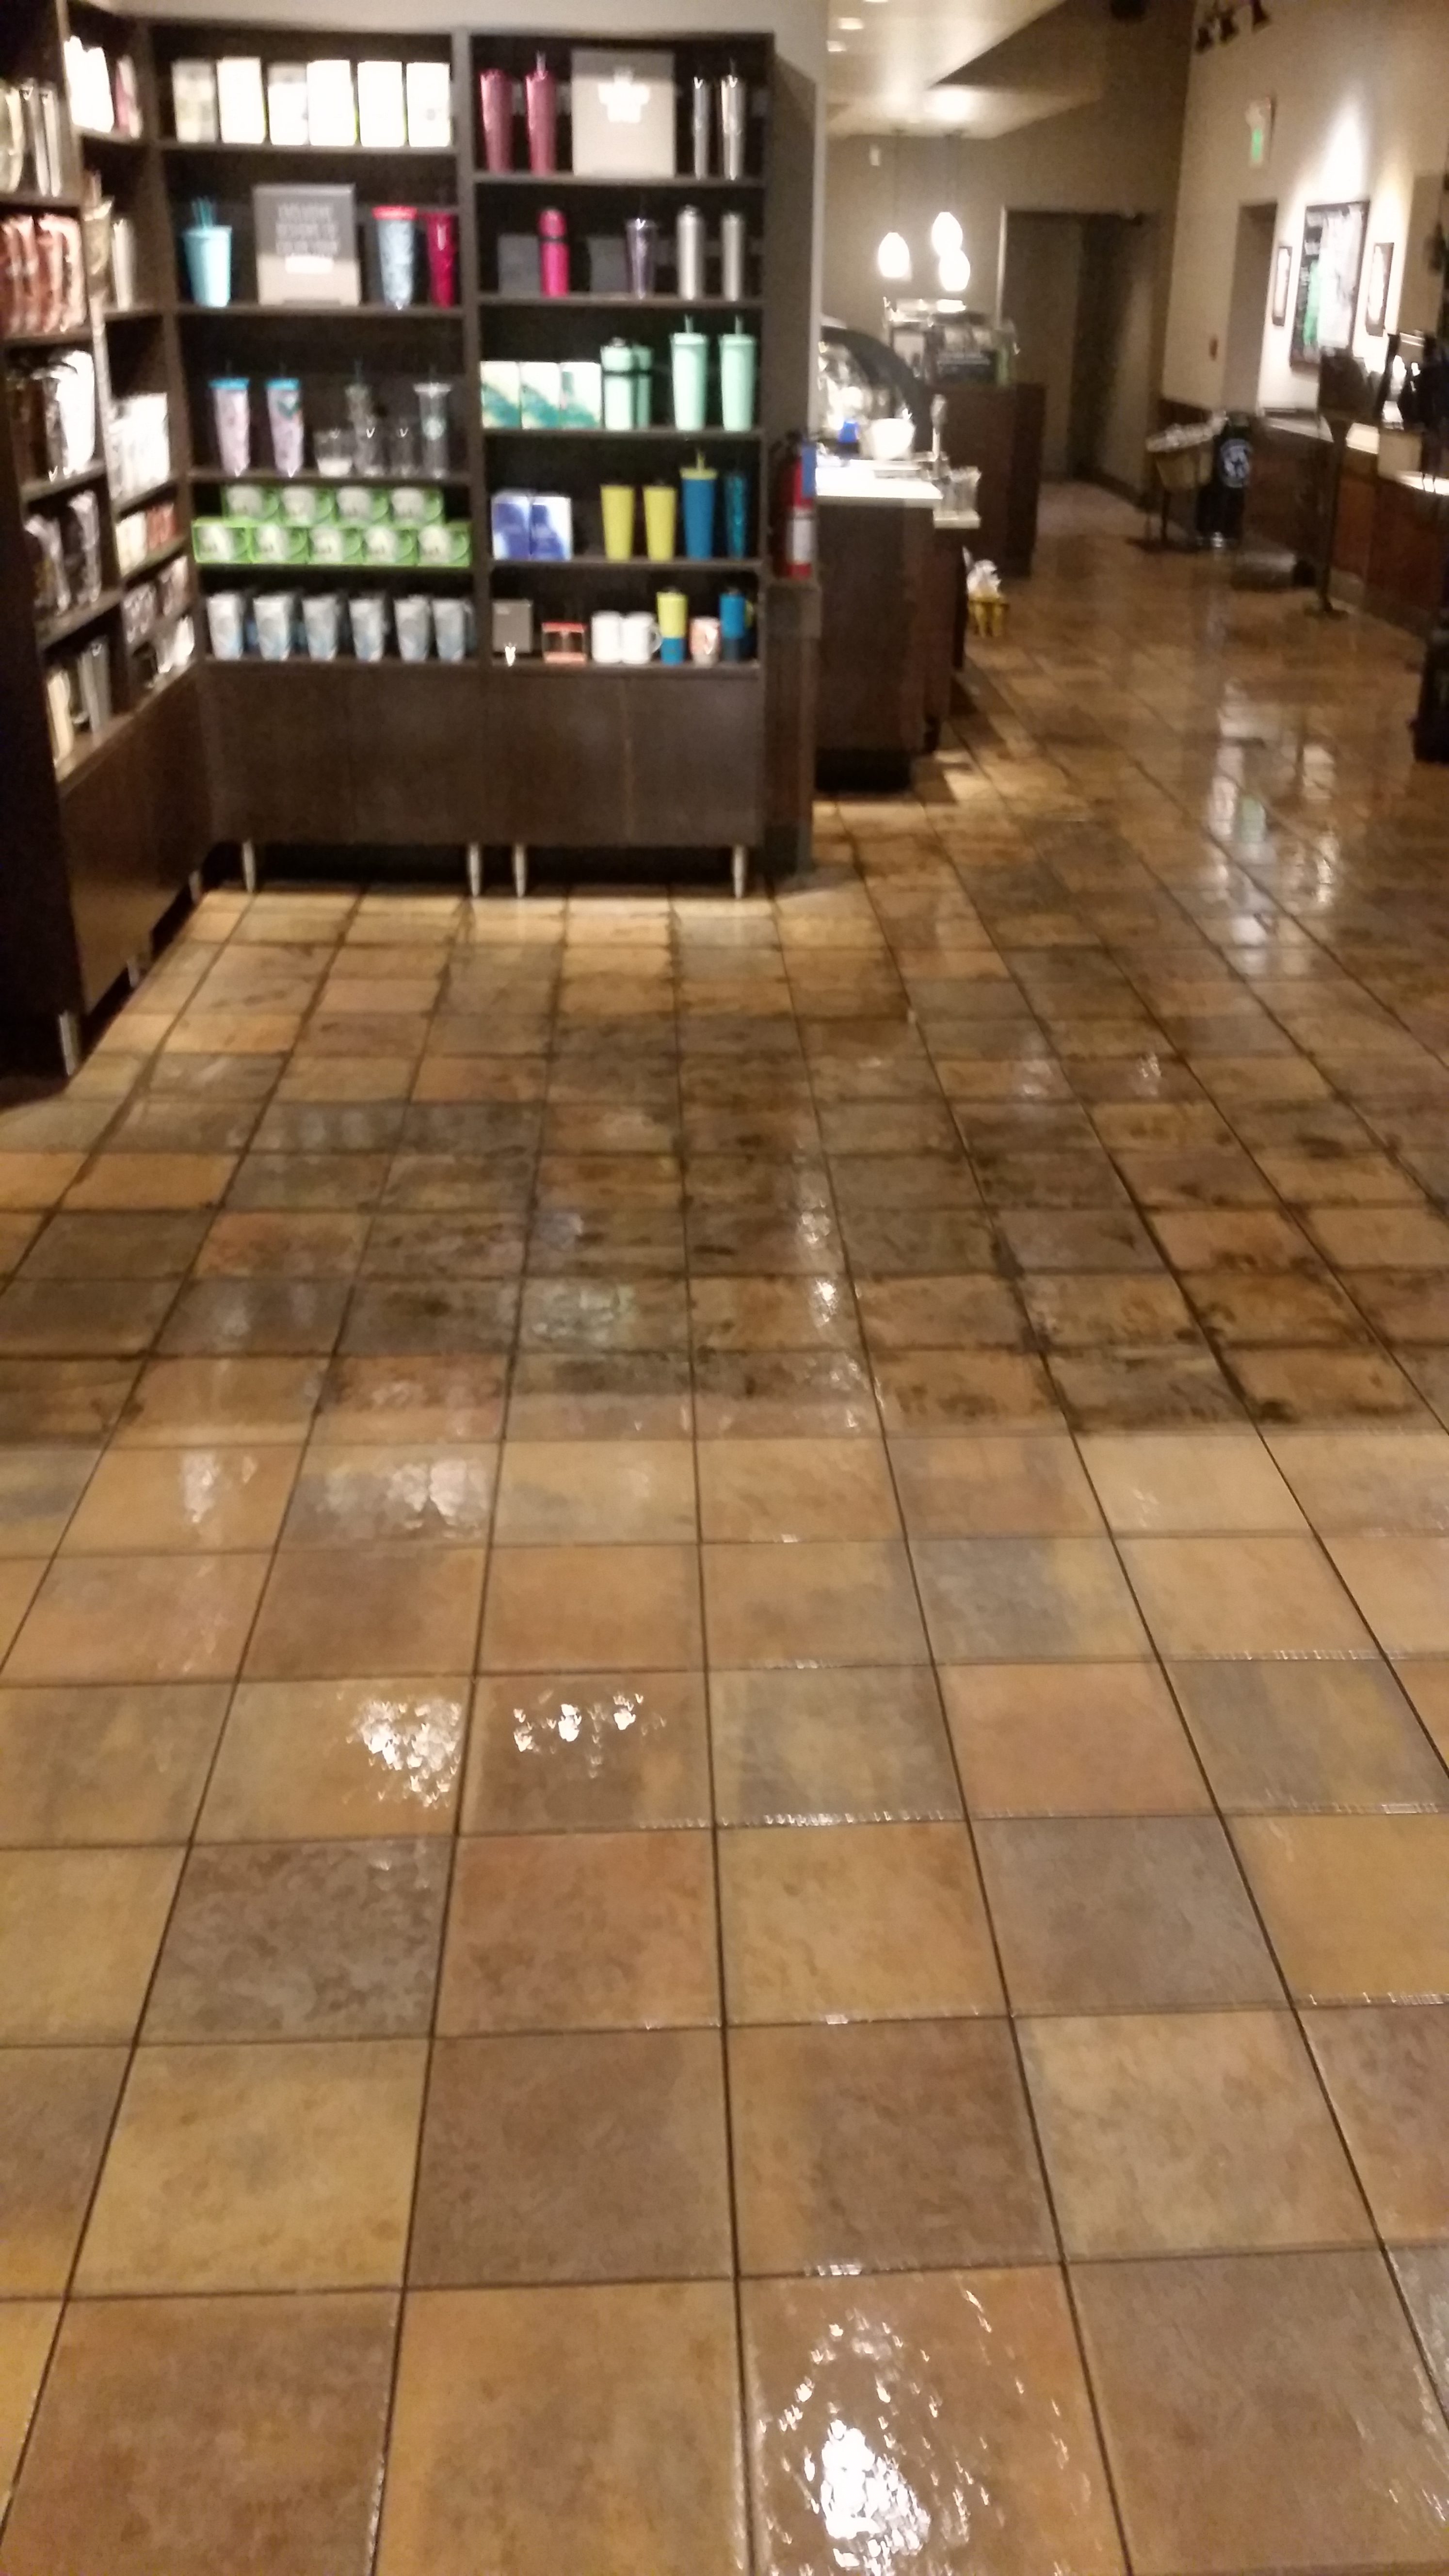 Tile & Grout Cleaning Starbucks Lutherville by CLEAN Choice Cleaning and Restoration